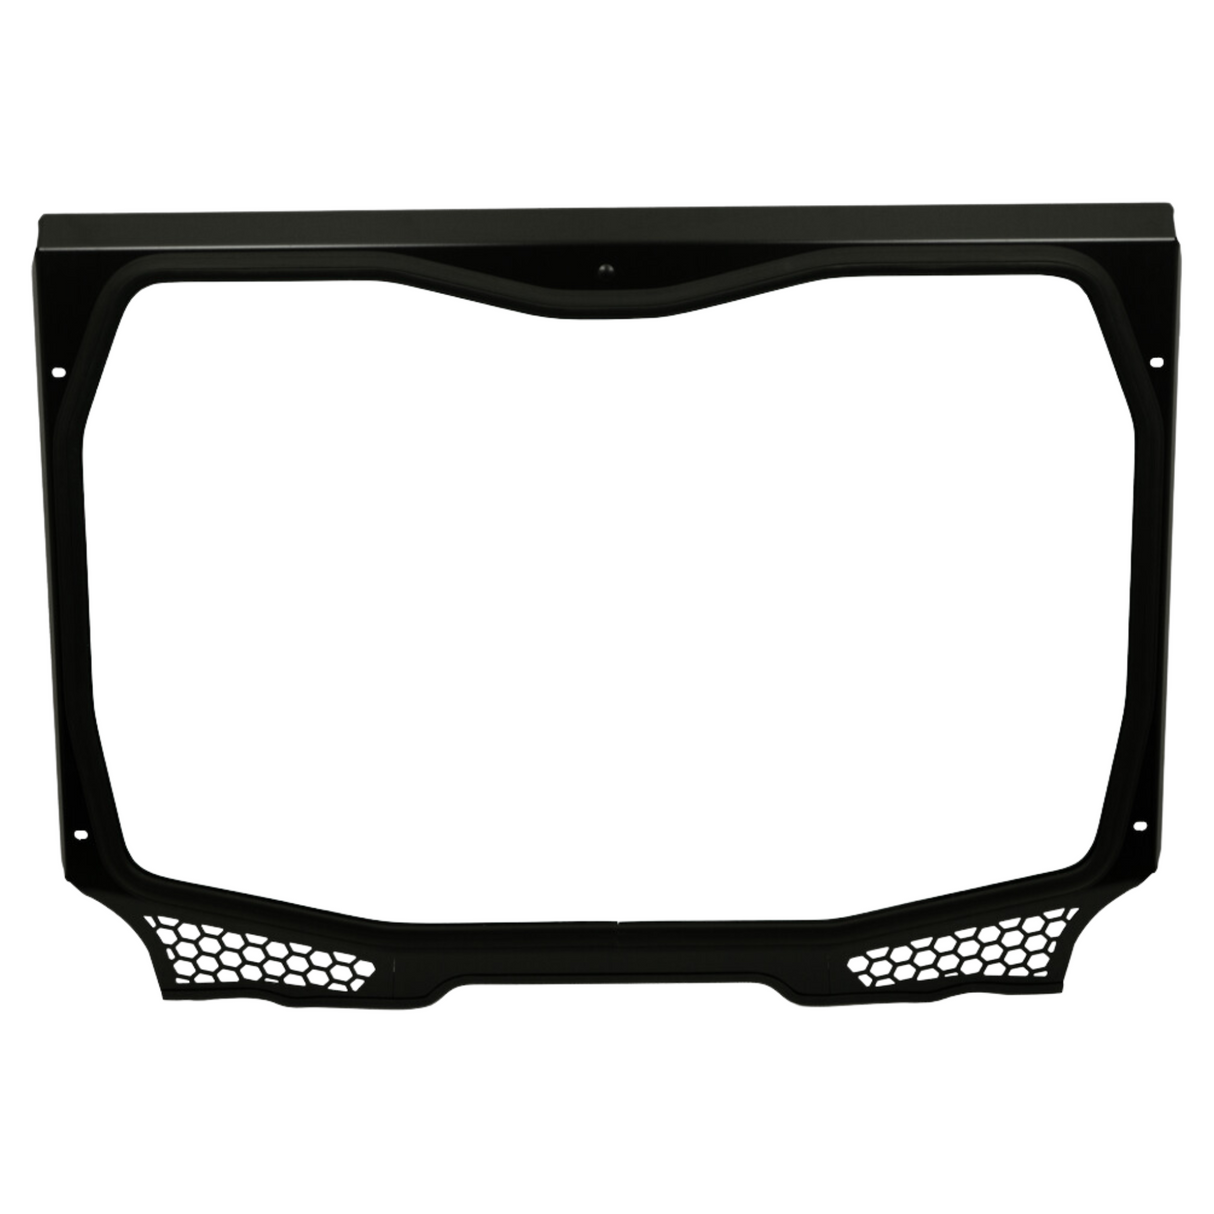 Polaris RZR Pro XP / Turbo R / Pro R Full Glass Windshield for VOODOO Riders Cage